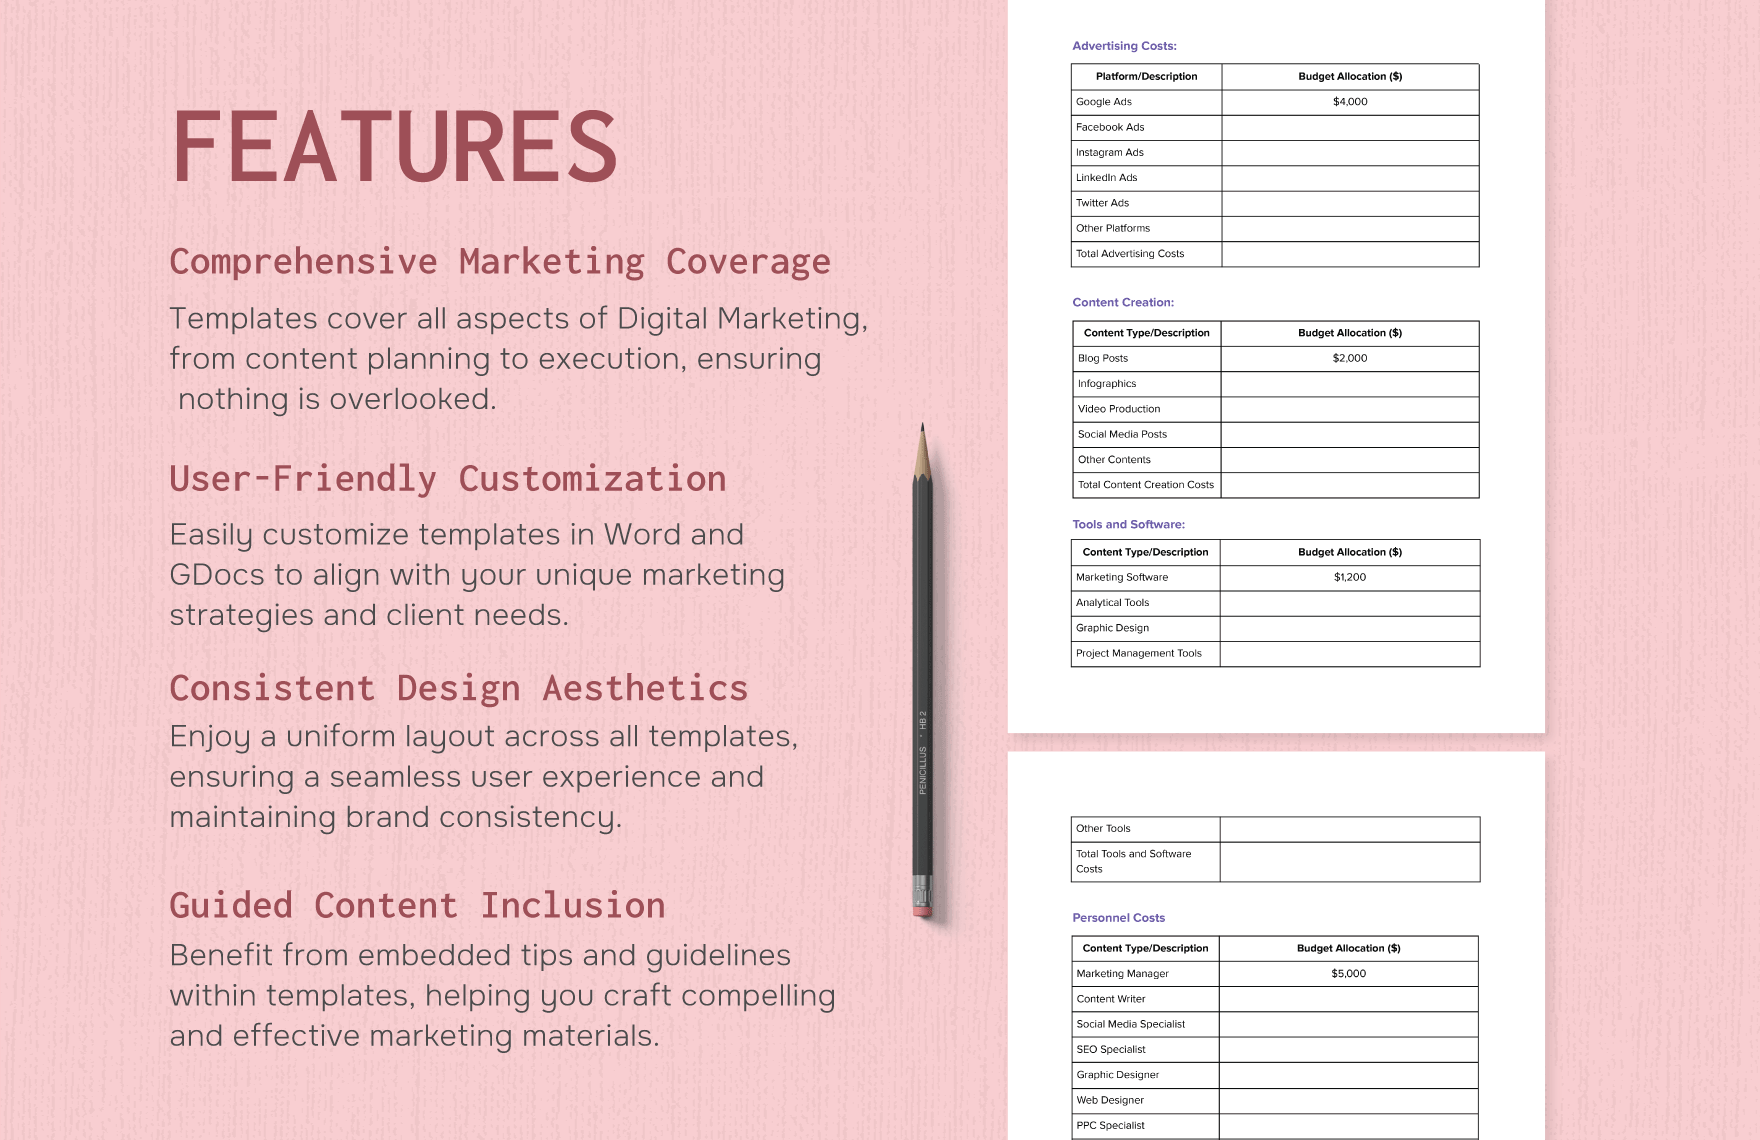 Digital Marketing Agency Marketing Campaign Budget Planner Template